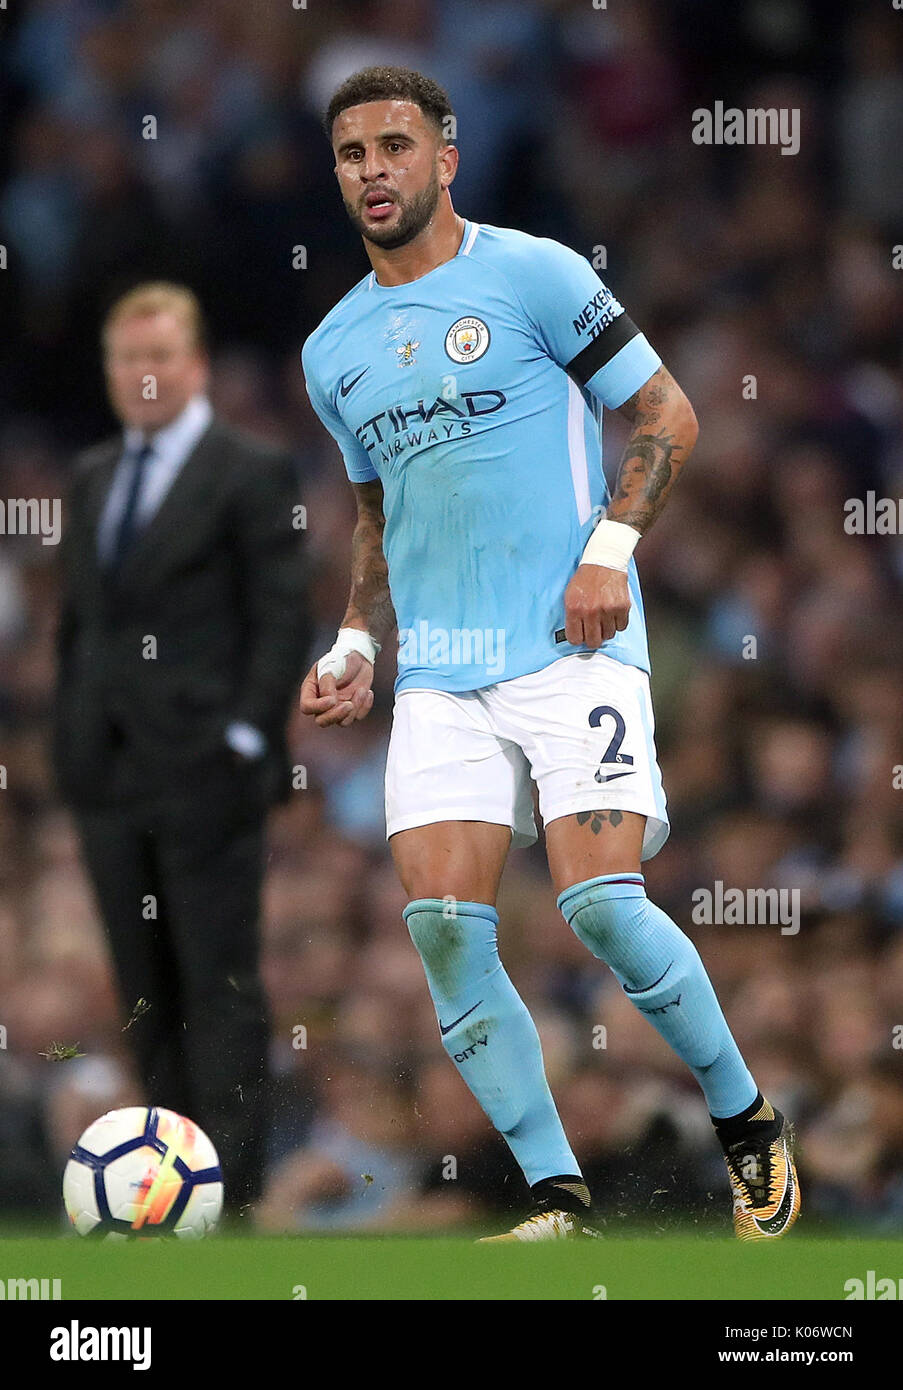 Manchester City's Kyle Walker during the Premier League match at the Etihad Stadium, Manchester. PRESS ASSOCIATION Photo. Picture date: Monday August 21, 2017. See PA story SOCCER Man City. Photo credit should read: Nick Potts/PA Wire. RESTRICTIONS: No use with unauthorised audio, video, data, fixture lists, club/league logos or 'live' services. Online in-match use limited to 75 images, no video emulation. No use in betting, games or single club/league/player publications. Stock Photo